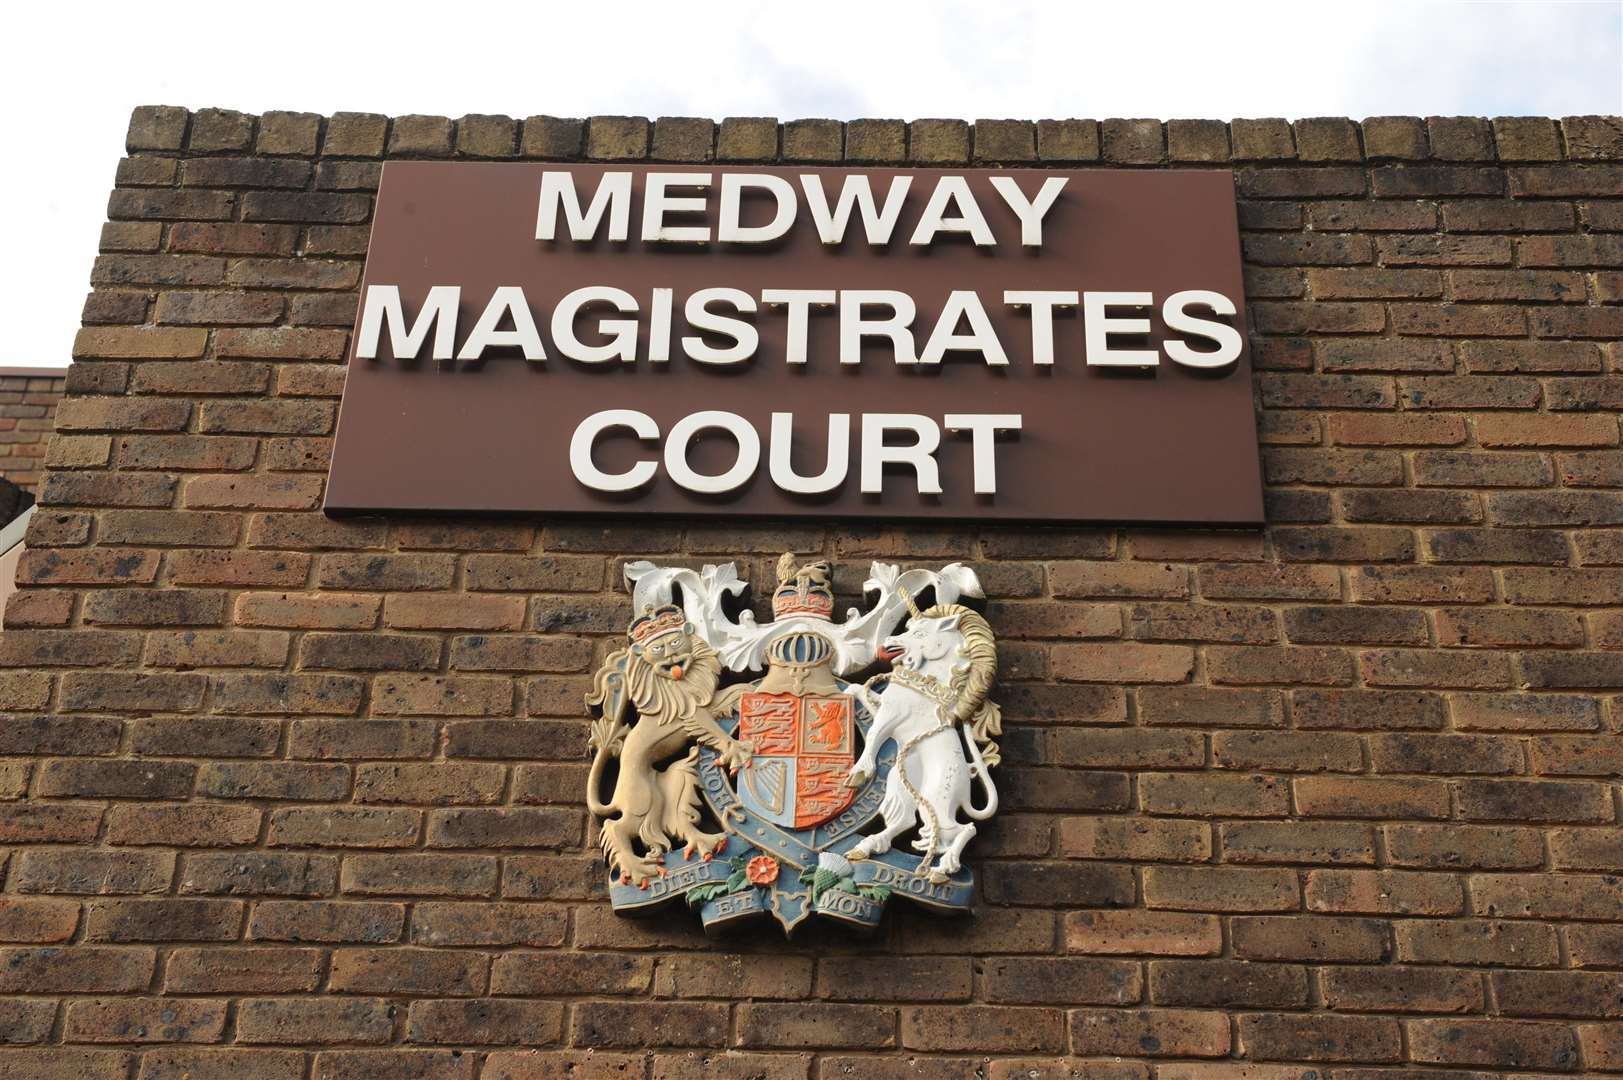 Solly appeared before magistrates in Medway